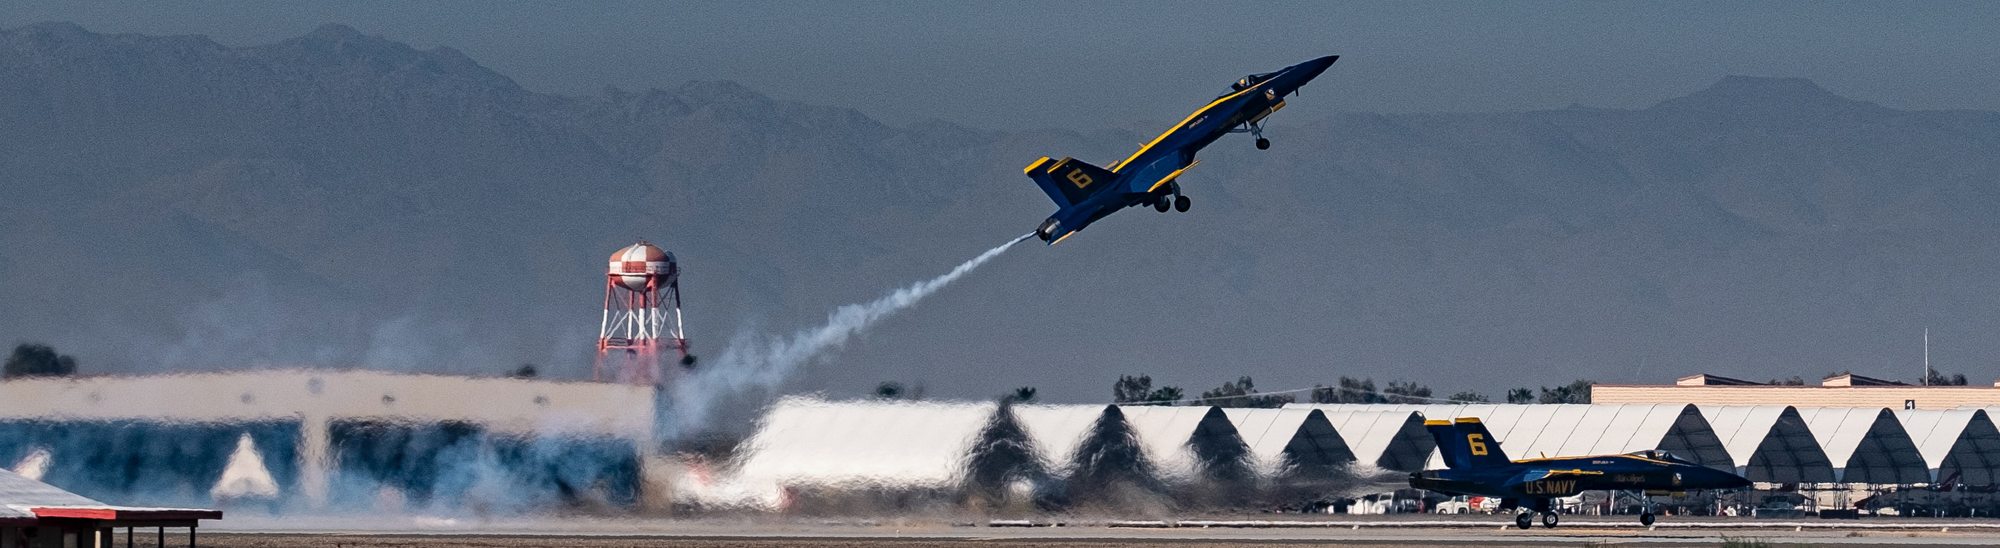 An image of a blue angel during take-off demonstrates the thrust needed to take a brand to new heights